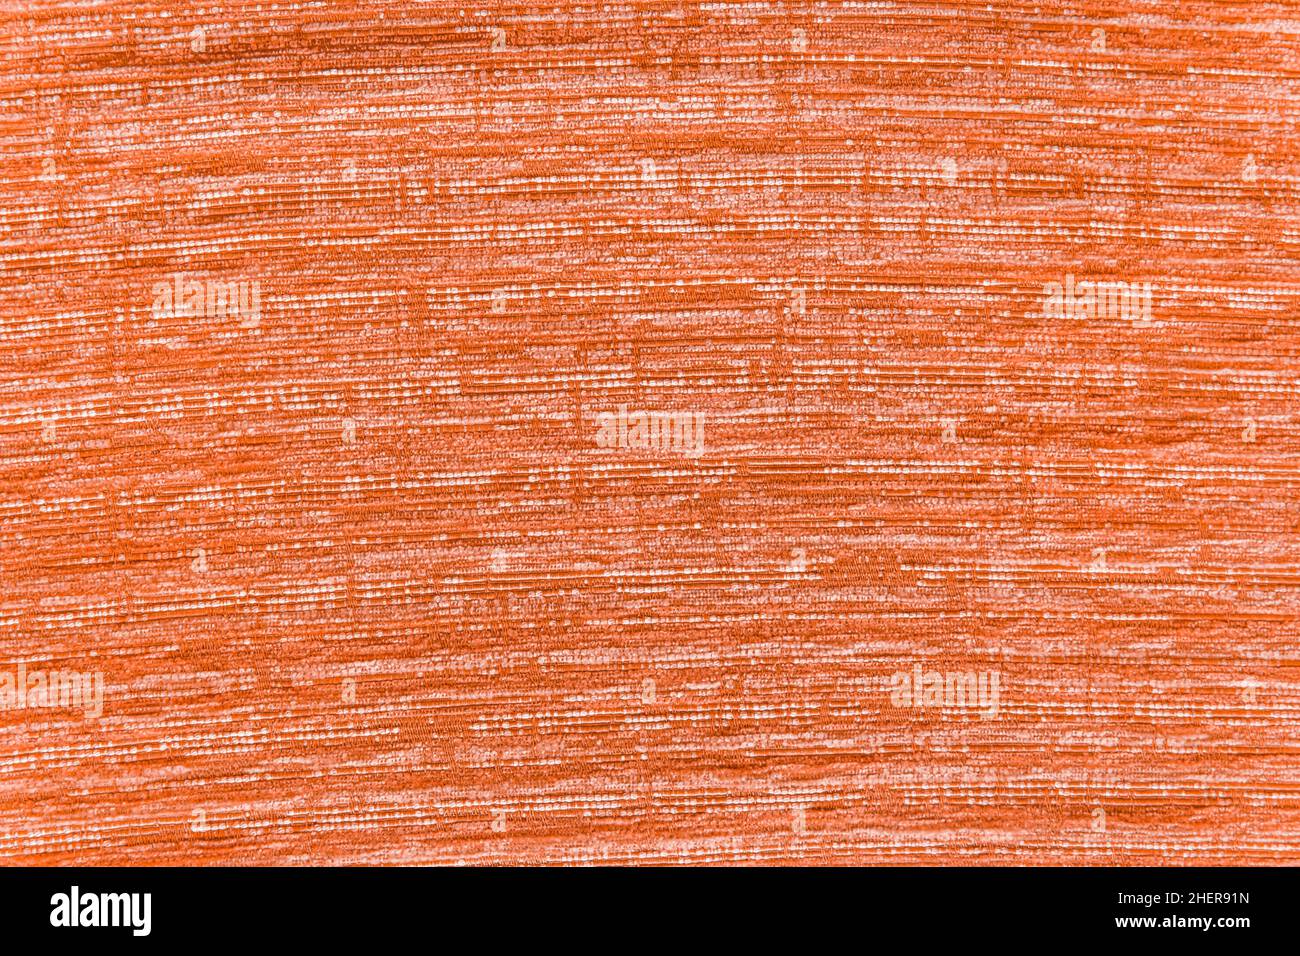 Red Orange Fabric Canvas Vintage Abstract Pattern Material Surface Textile Texture background. Foto Stock